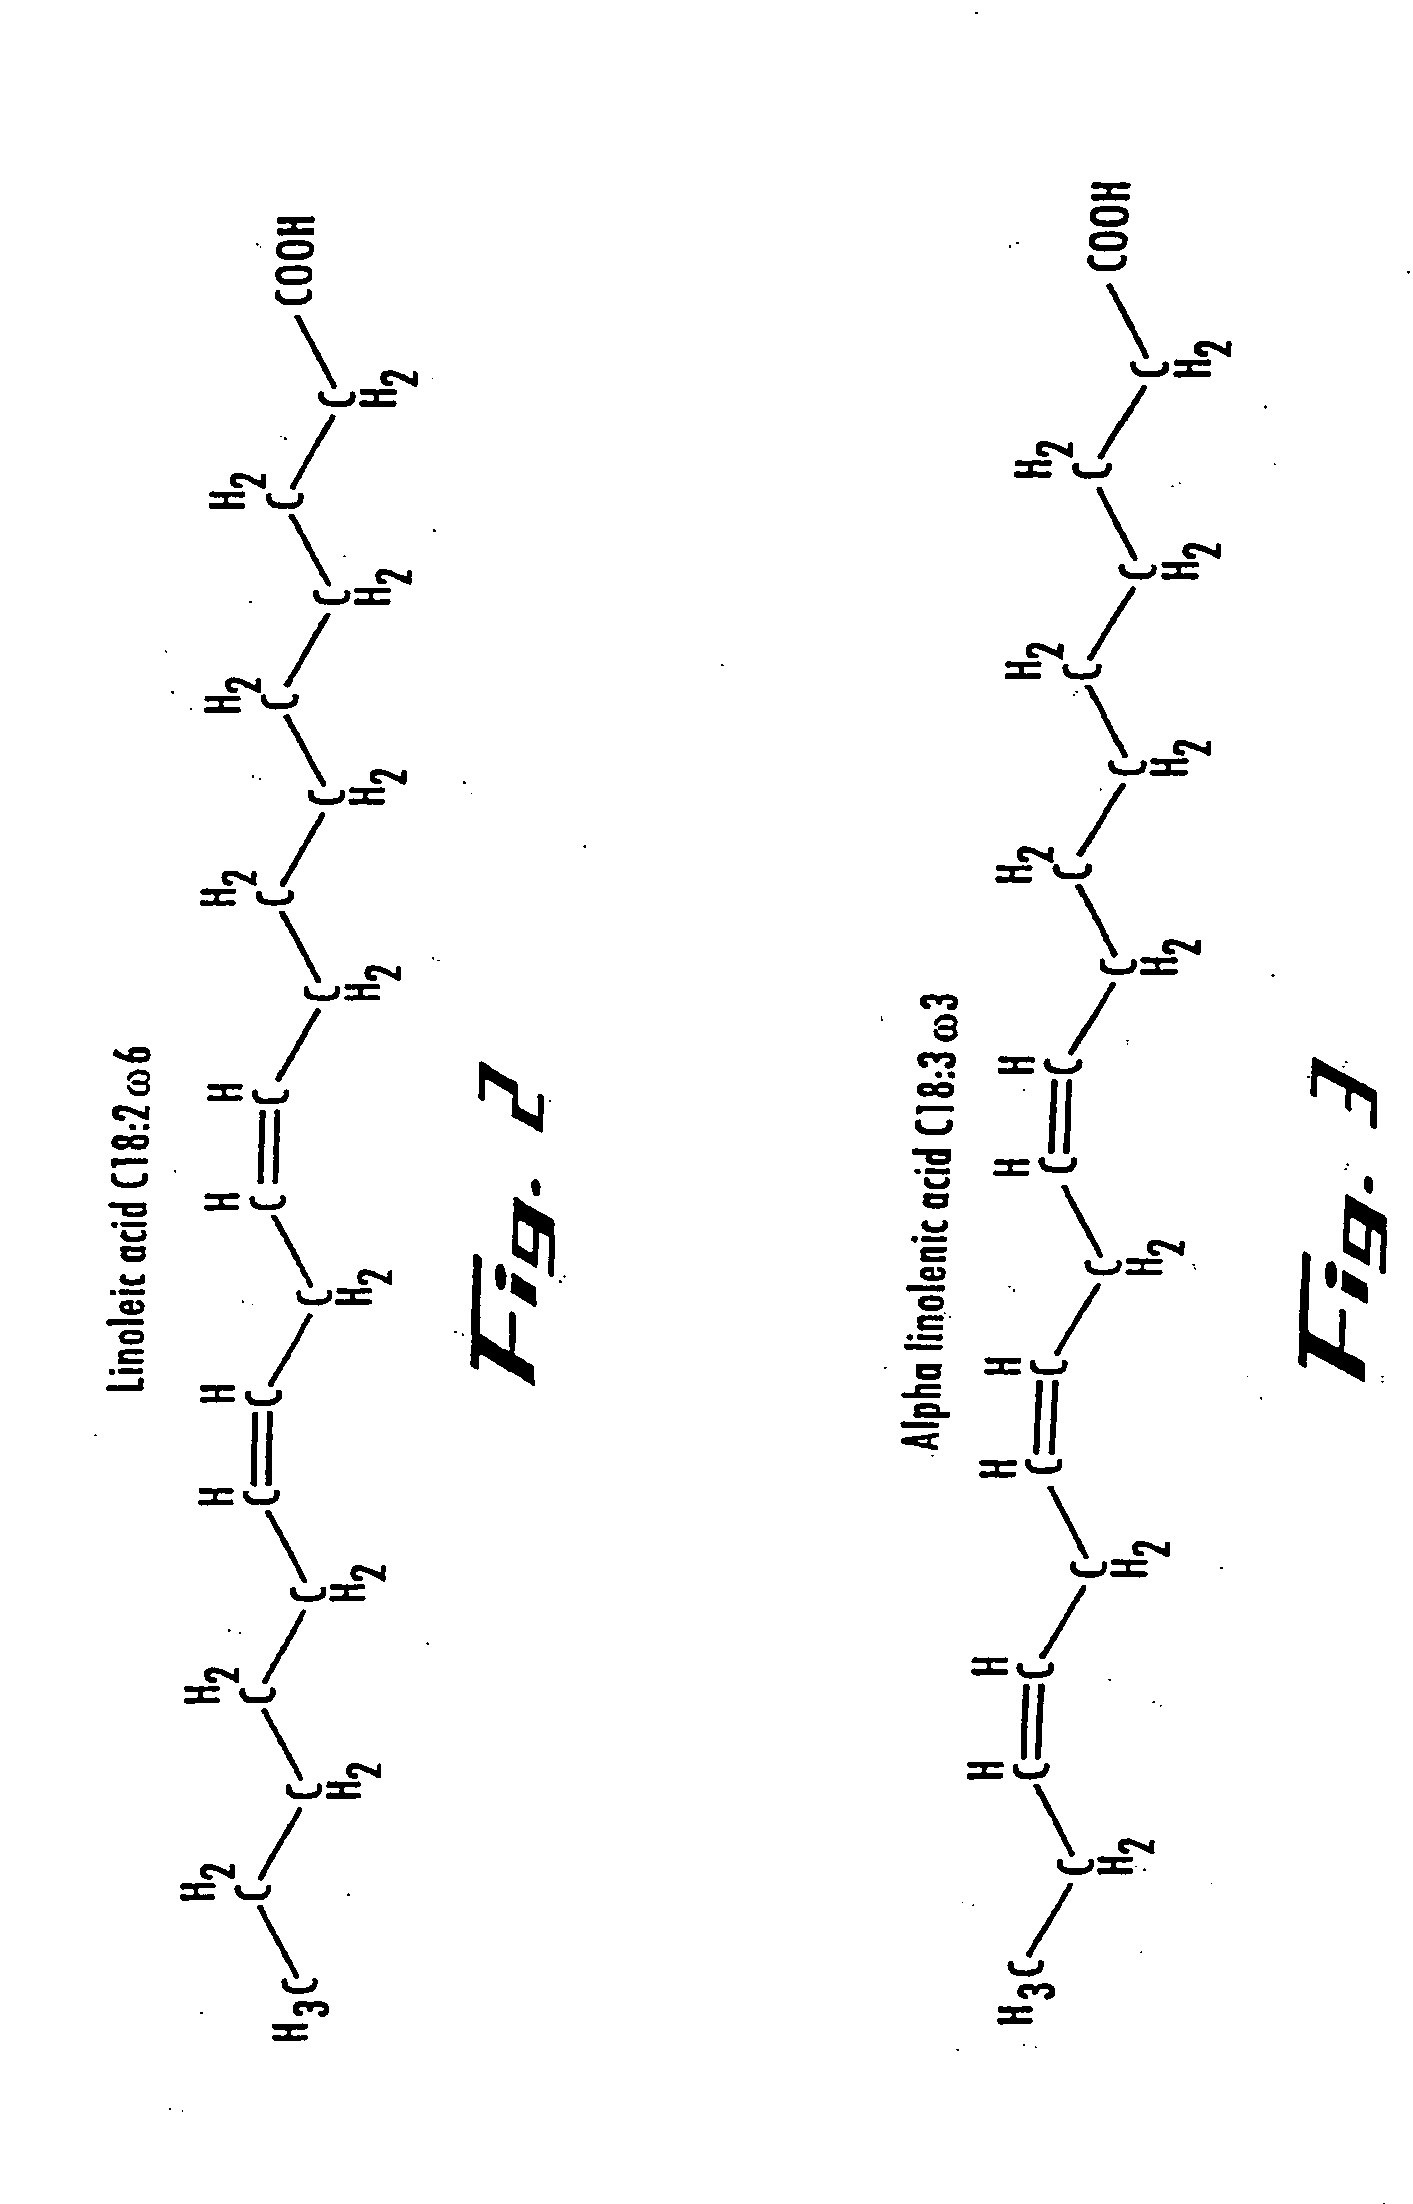 Chemical synthesis methods using electro-catalysis